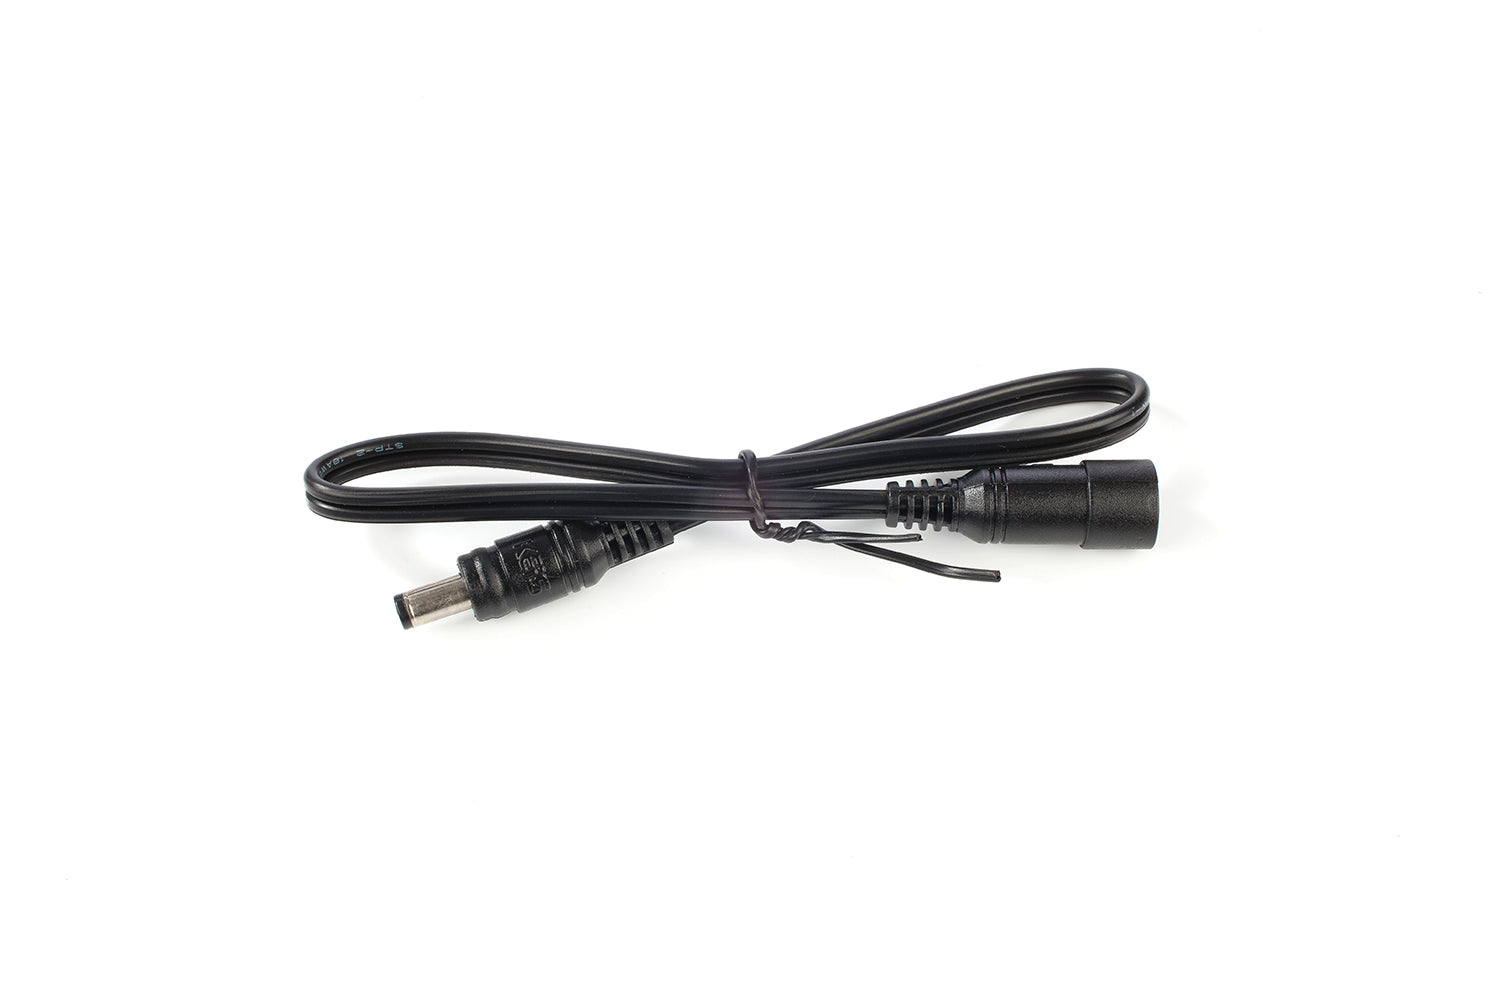 Keis heated clothing cable extension